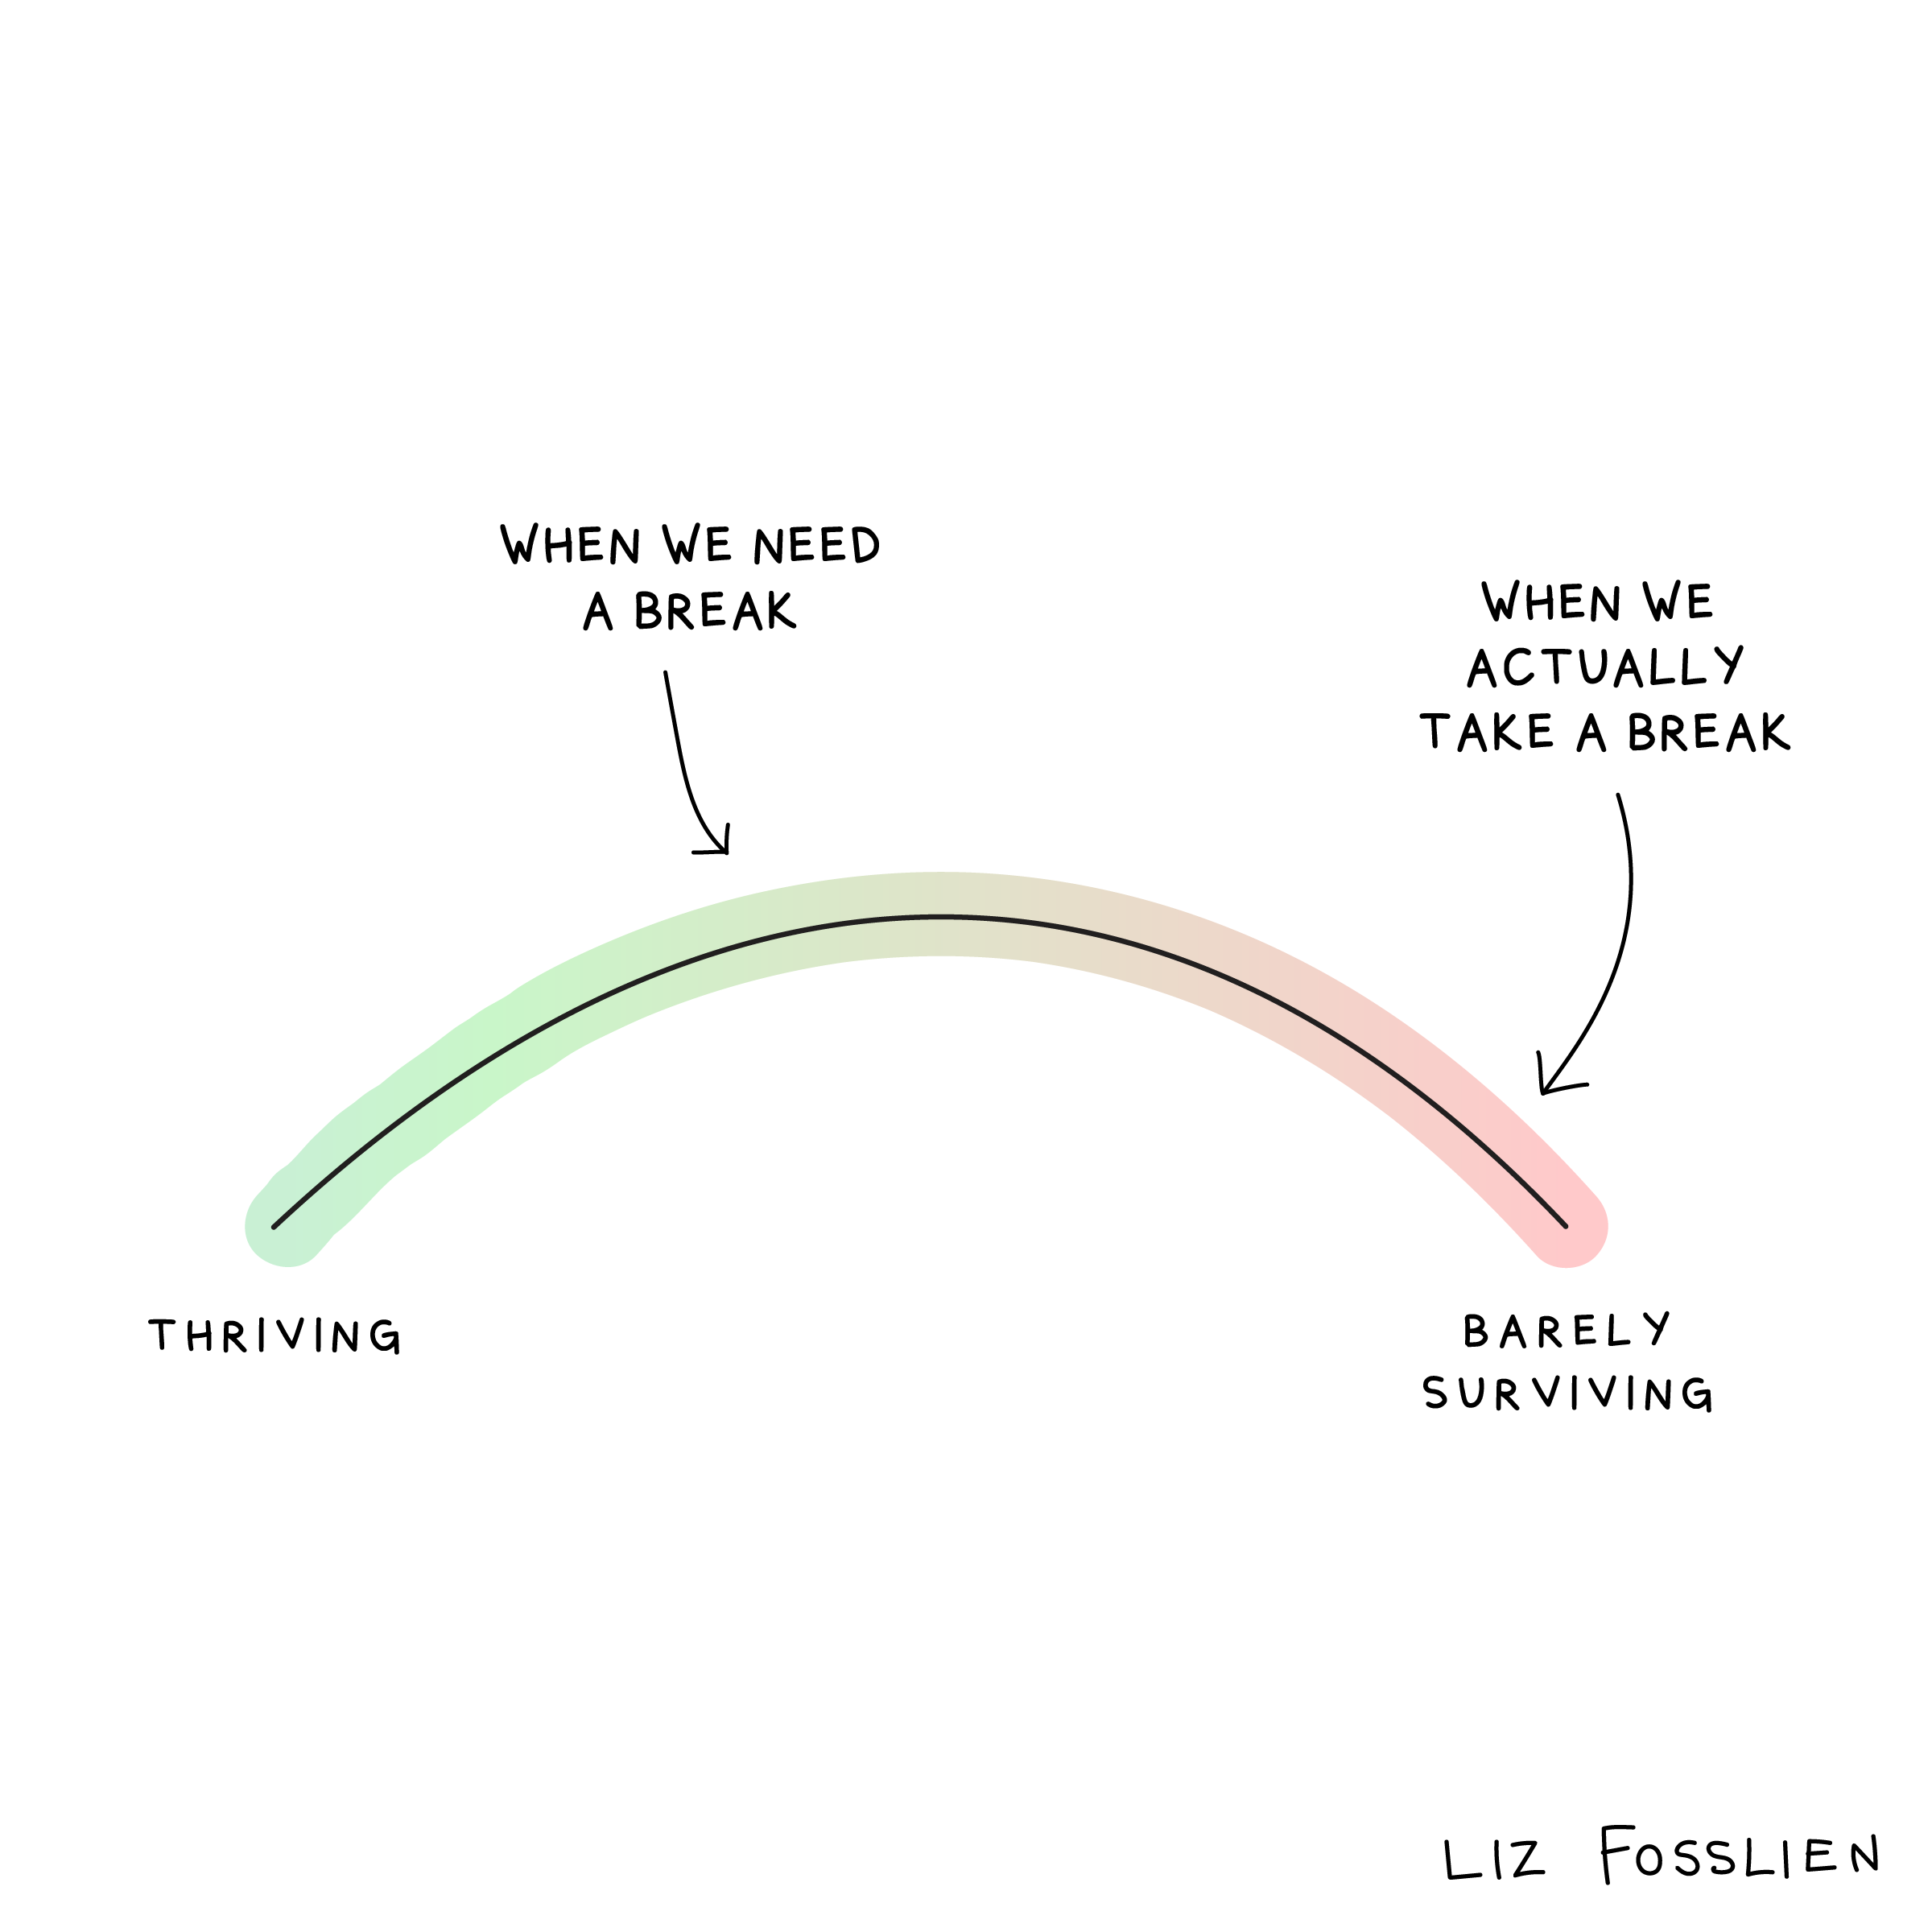 Cartoon showing a spectrum of thriving to barely surviving and when we need a break versus when we actually take a break